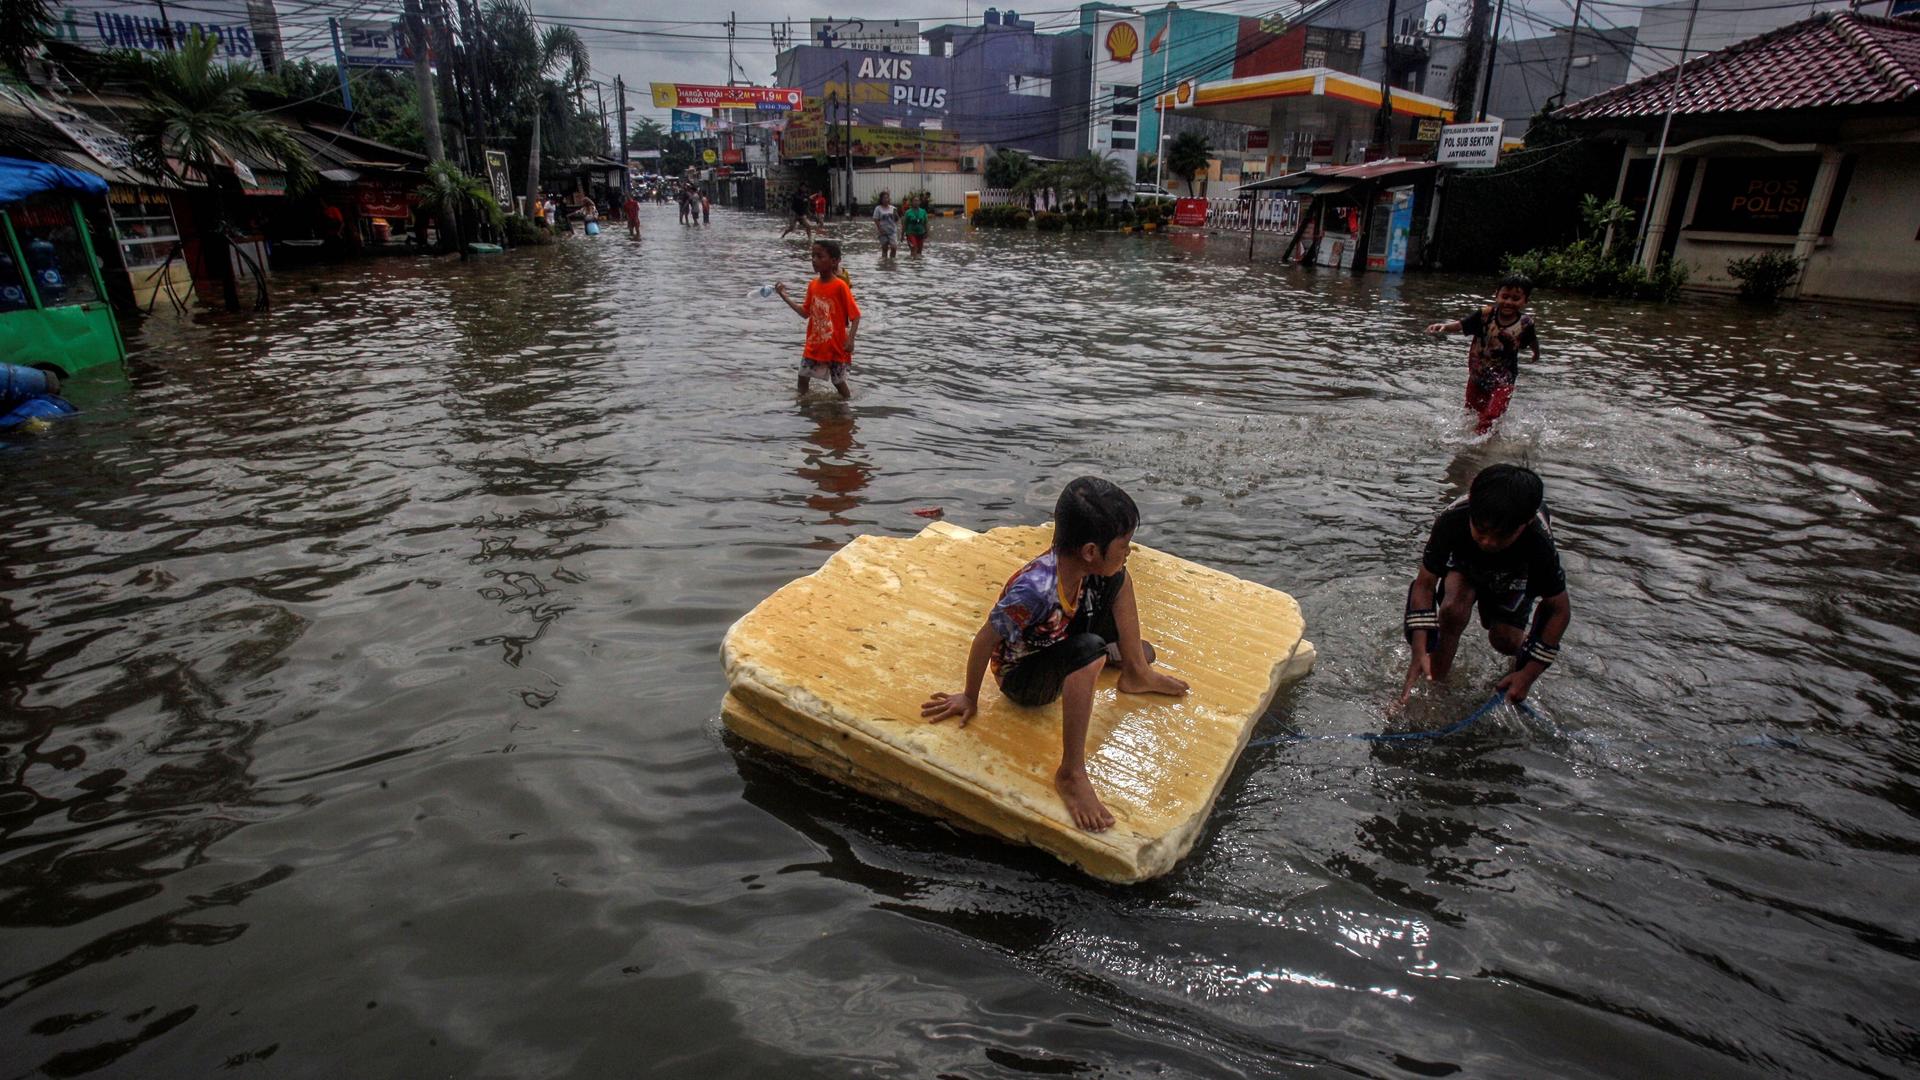 Children play in the floodwaters after heavy rains in Bekasi, near Jakarta, Indonesia, Feb. 25, 2020.